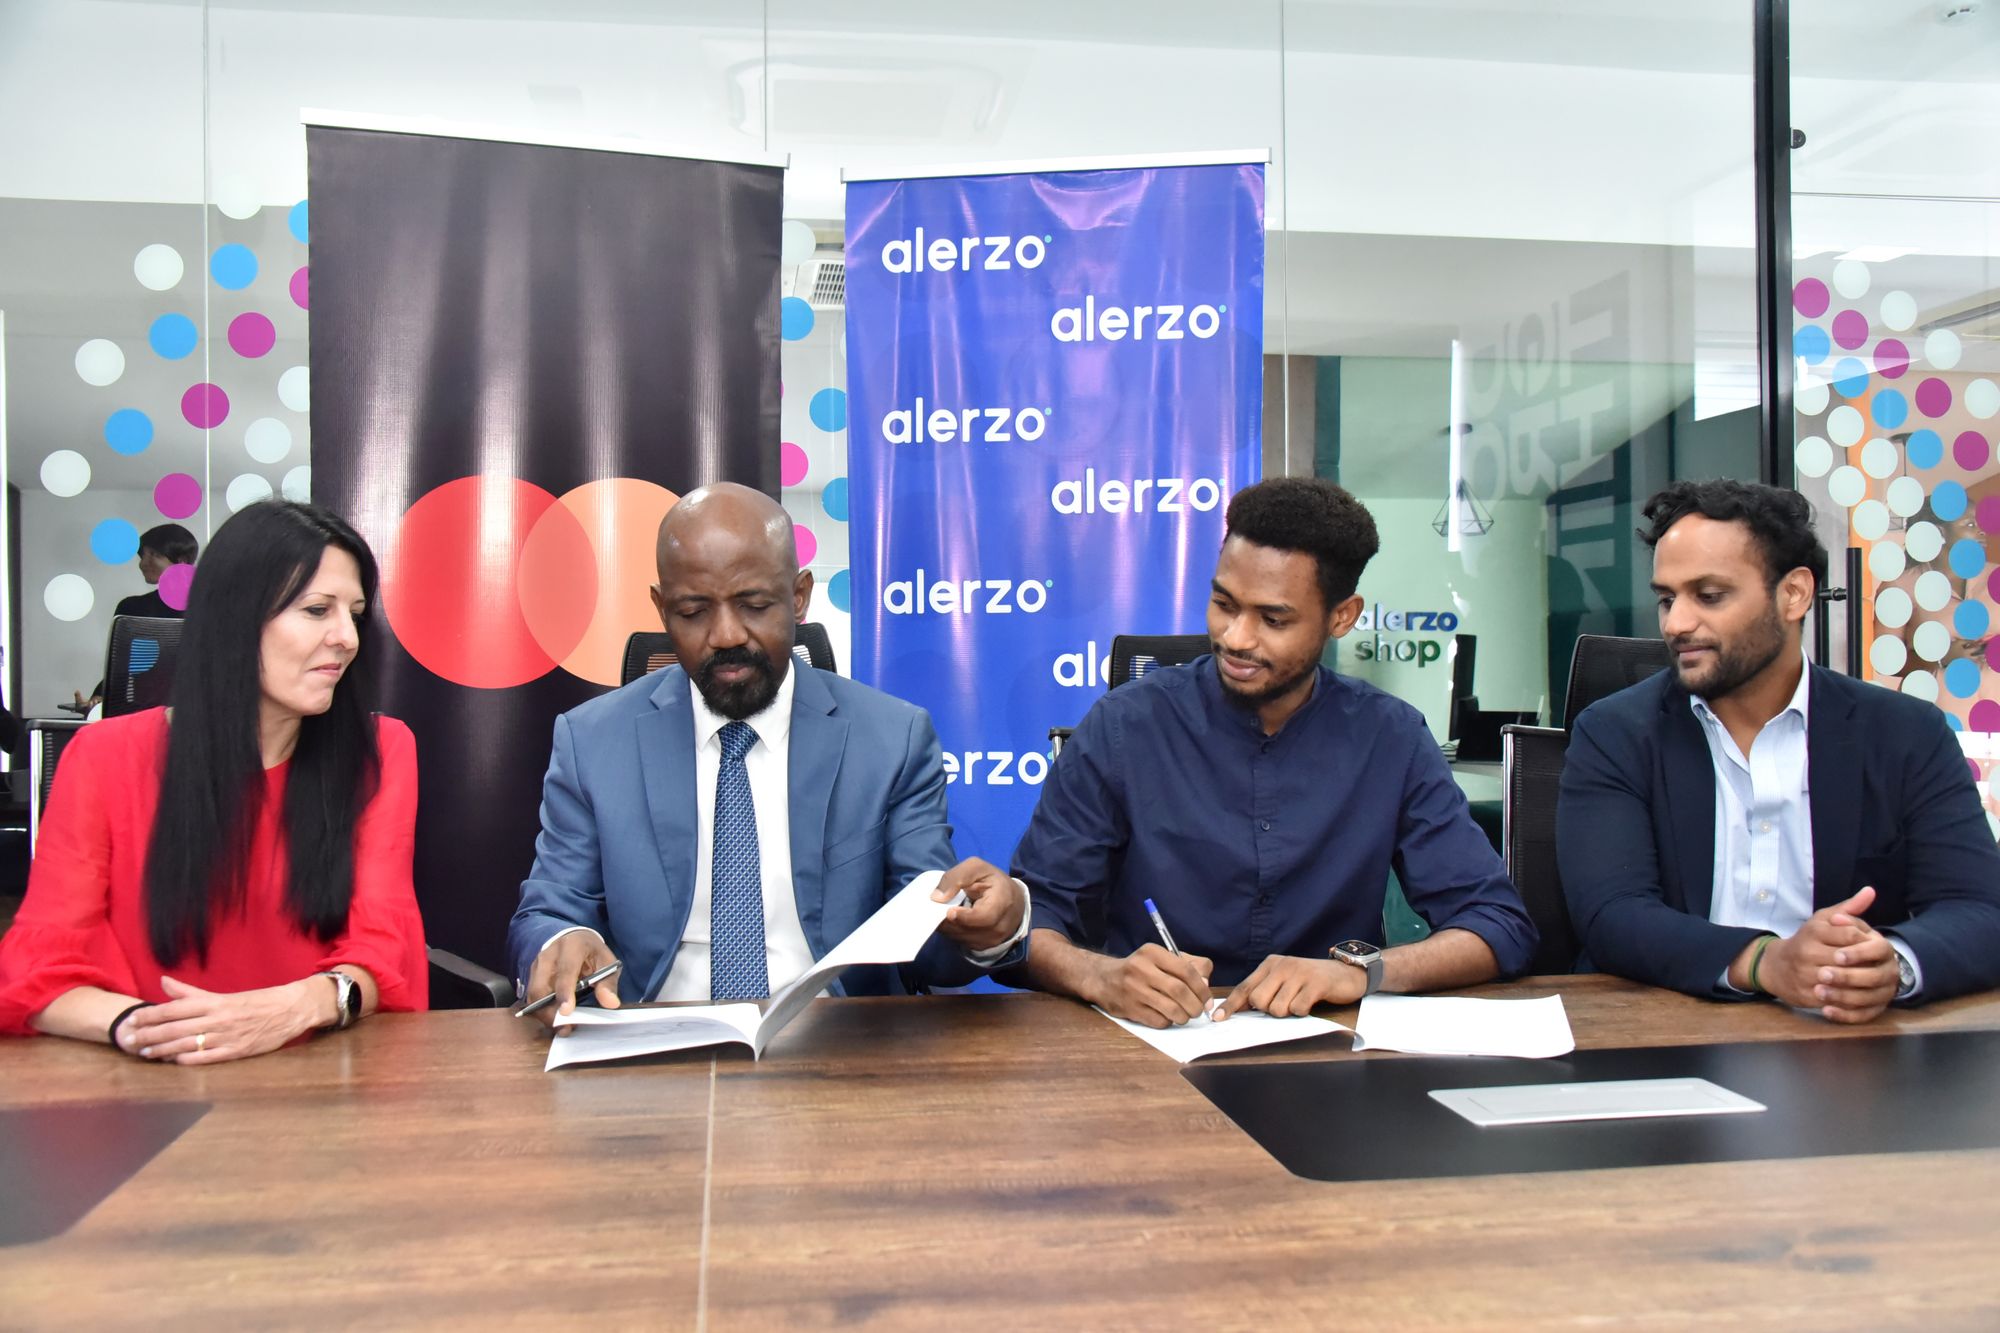 Mastercard Partner With Alerzo To Transform Nigeria's SMEs With Digital Solutions